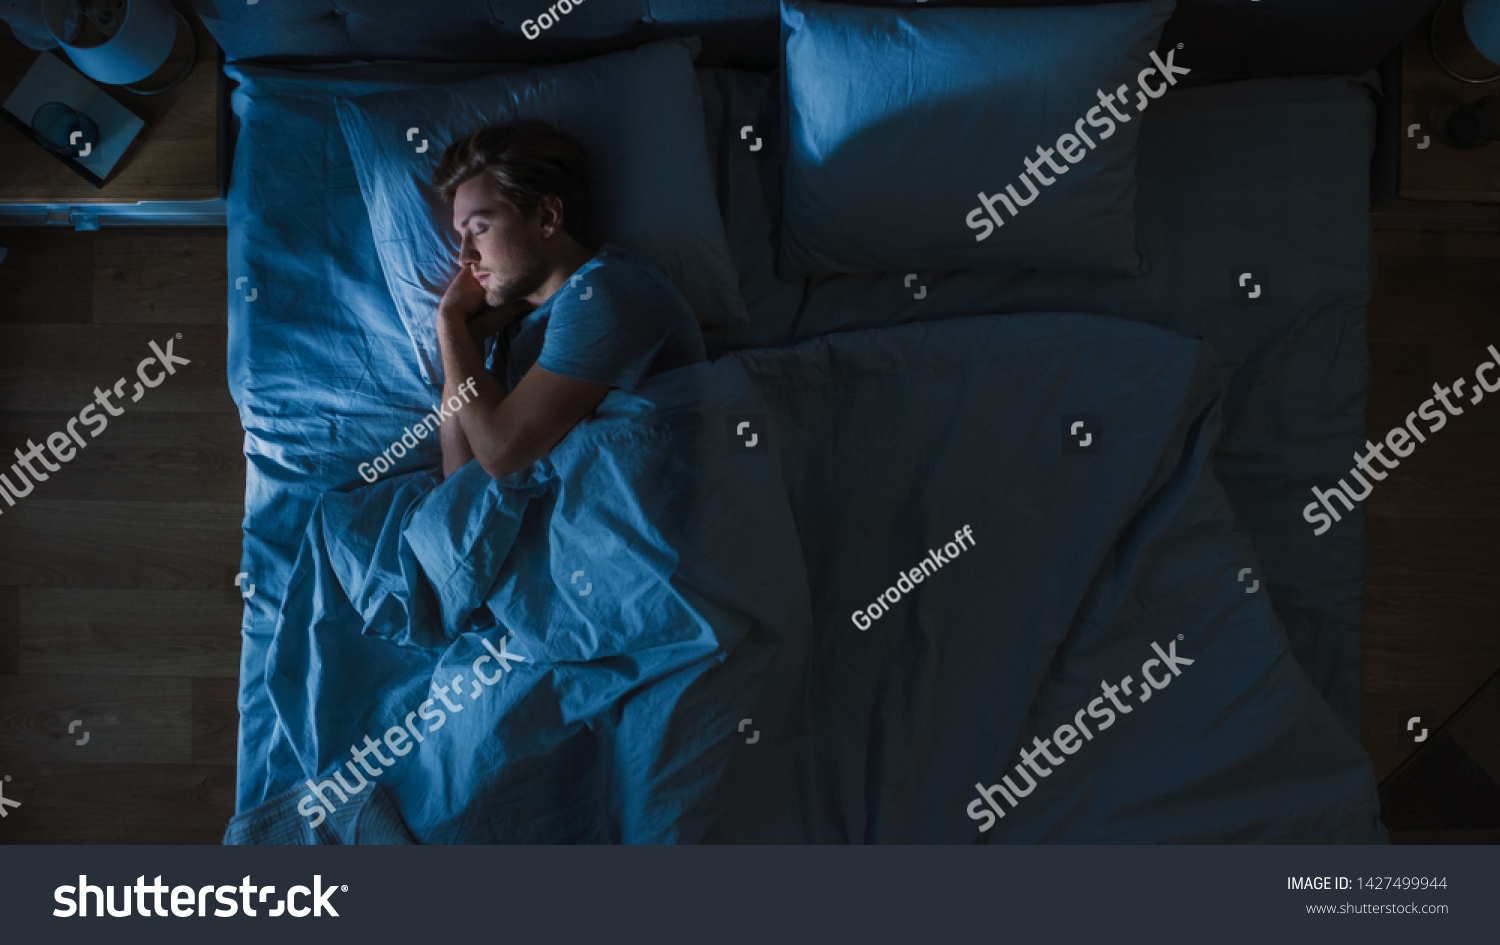 Top View of Handsome Young Man Sleeping Cozily on a Bed in His Bedroom at Night. Blue Nightly Colors with Cold Weak Lamppost Light Shining Through the Window. #1427499944